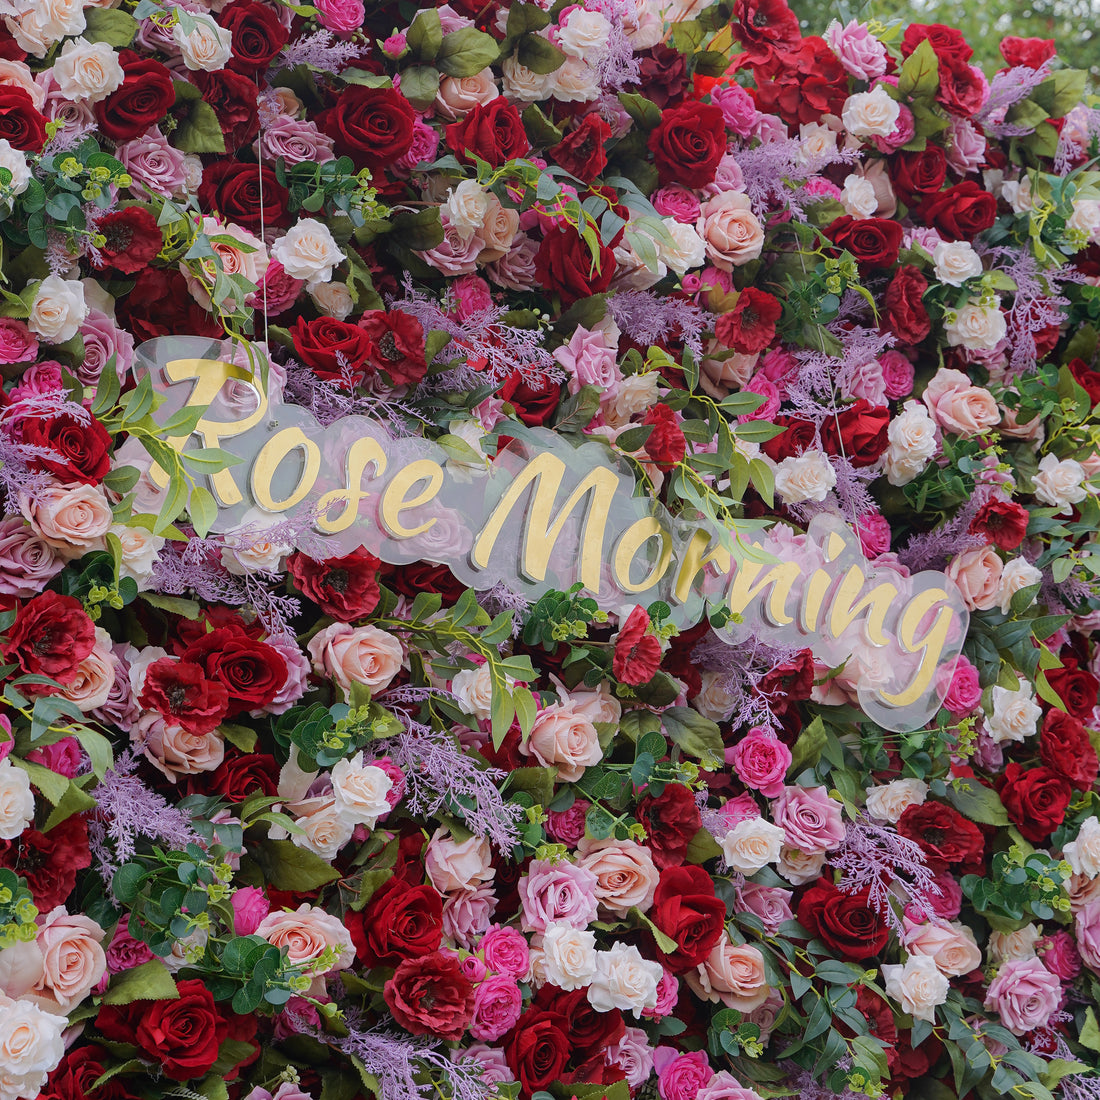 The flower walls are made of artificial flowers in various colors, layered at different levels to create a lush, elegant and natural look. The exclusive zipper design and roll-up design make it easy to install and remove.Rose Morning